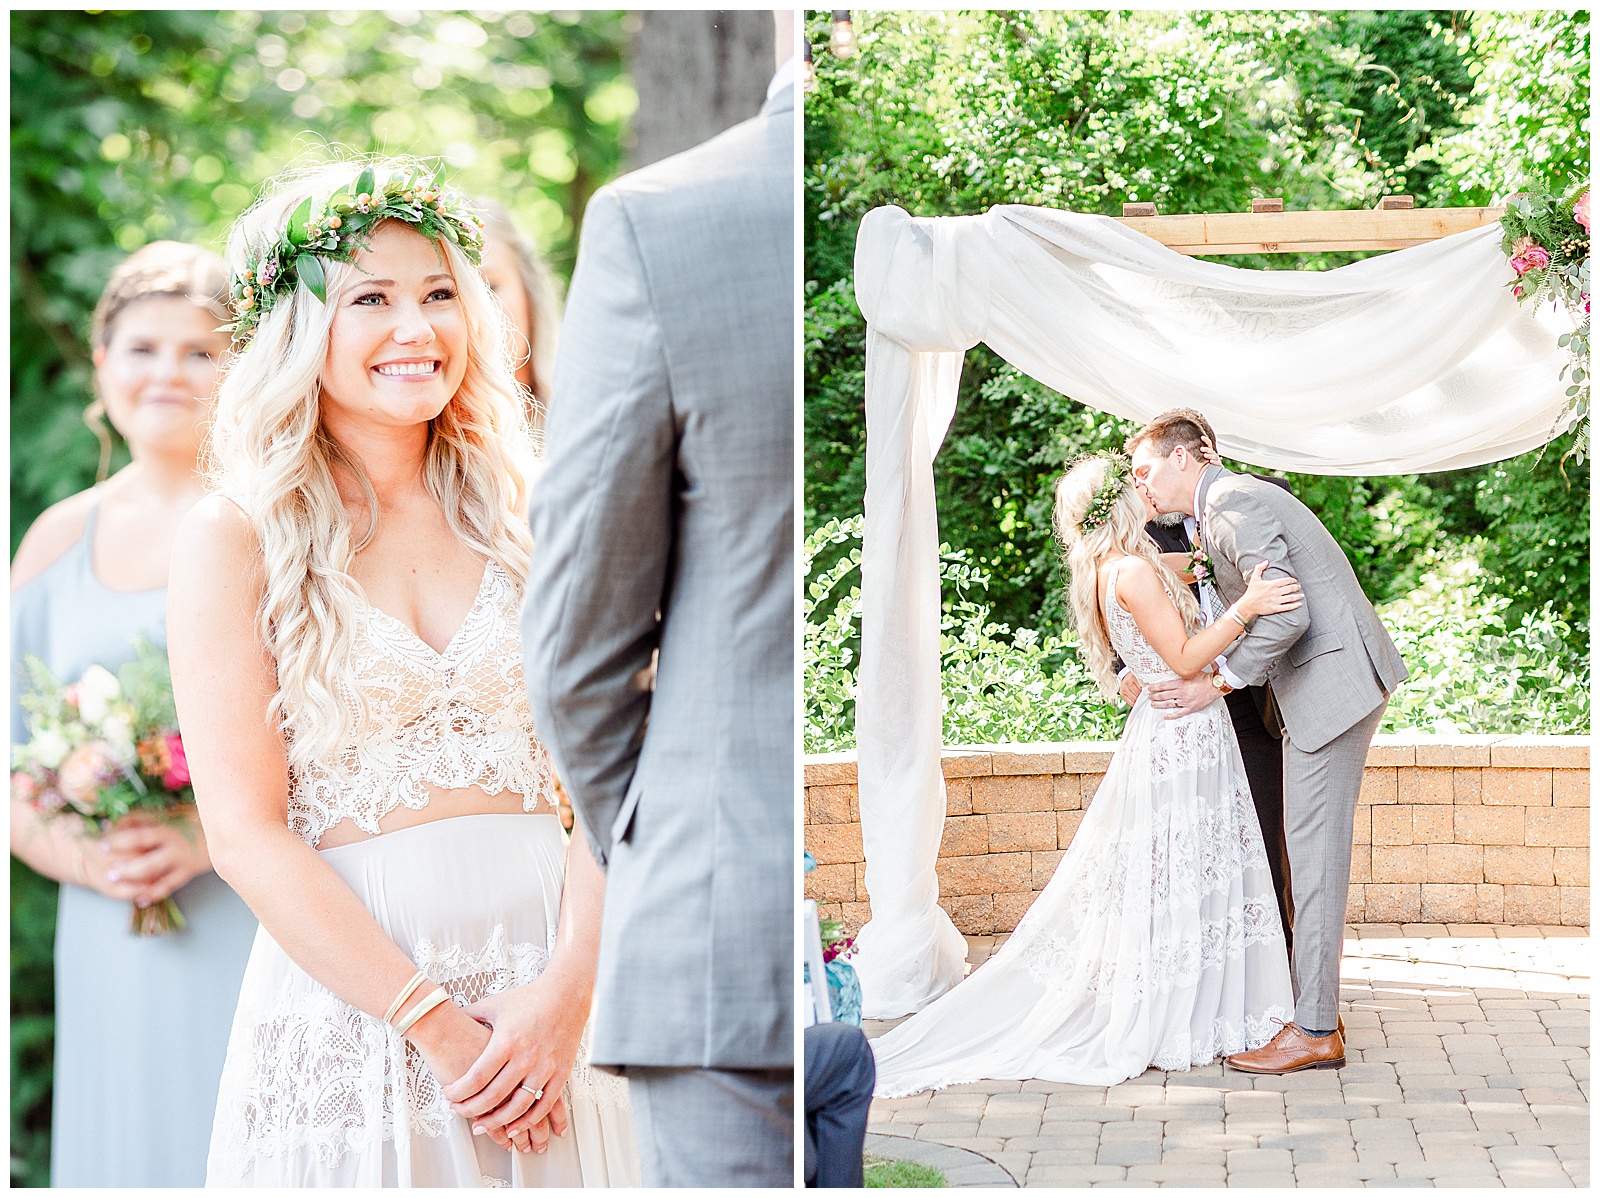 Emotional Bohemian Bride Ceremony from Boho Chic Summer Wedding in Charlotte, NC | check out the full wedding at KevynDixonPhoto.com